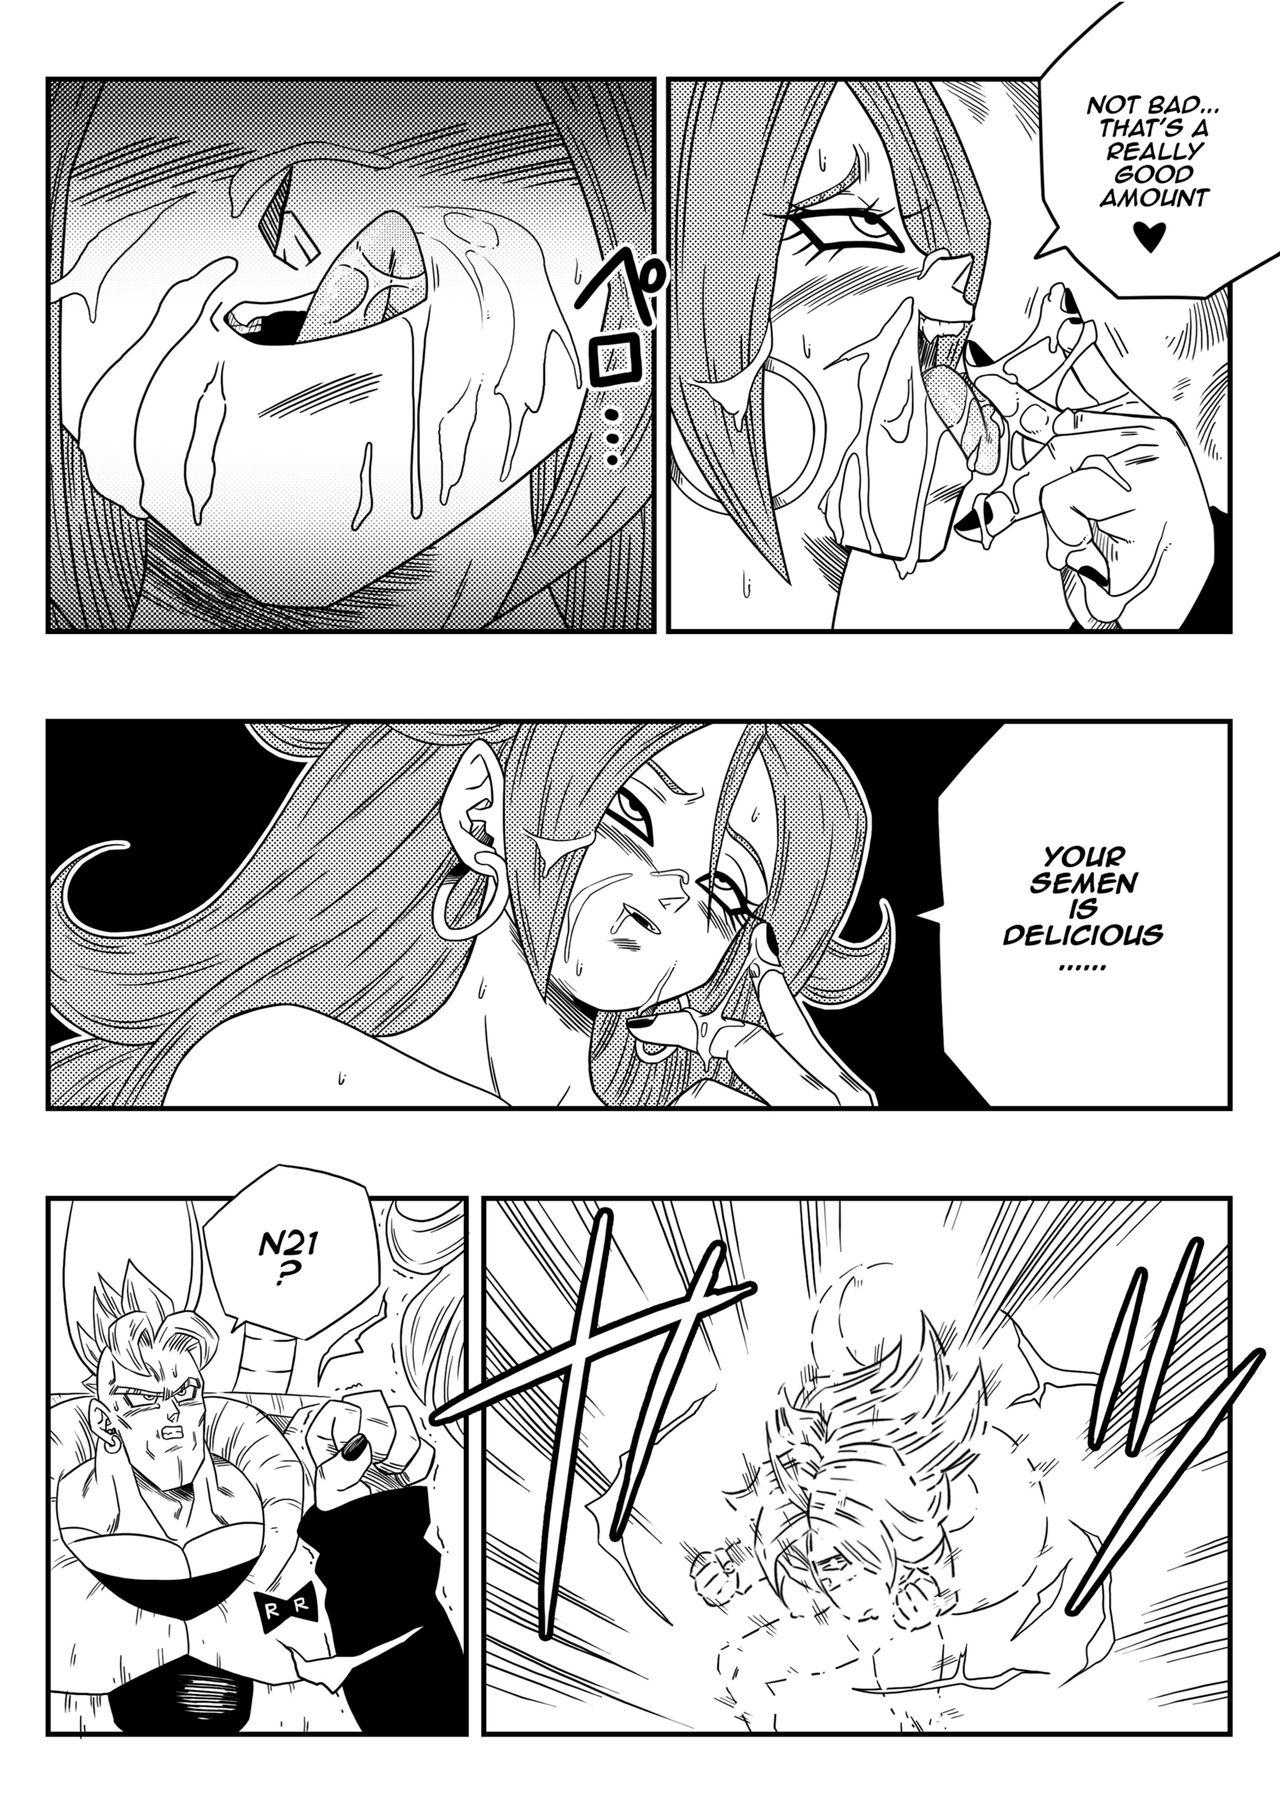 Short Kyonyuu Android Sekai Seiha o Netsubou!! Android 21 Shutsugen!! | Busty Android Wants to Dominate the World! - Dragon ball Neighbor - Page 9